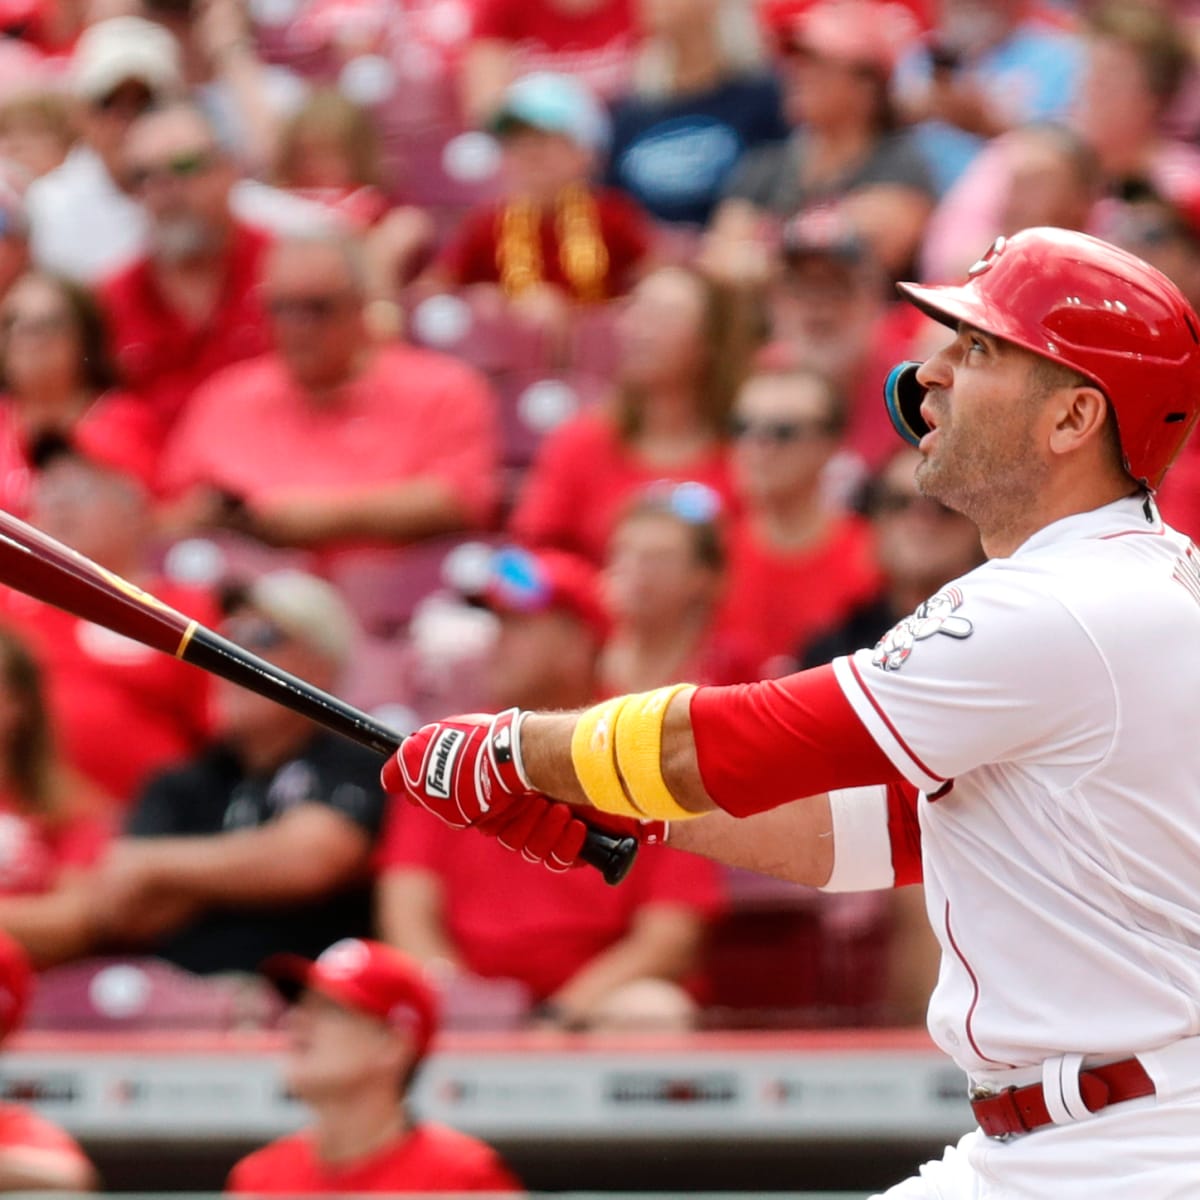 Cincinnati Reds' Joey Votto said he was 'confused' about past HR